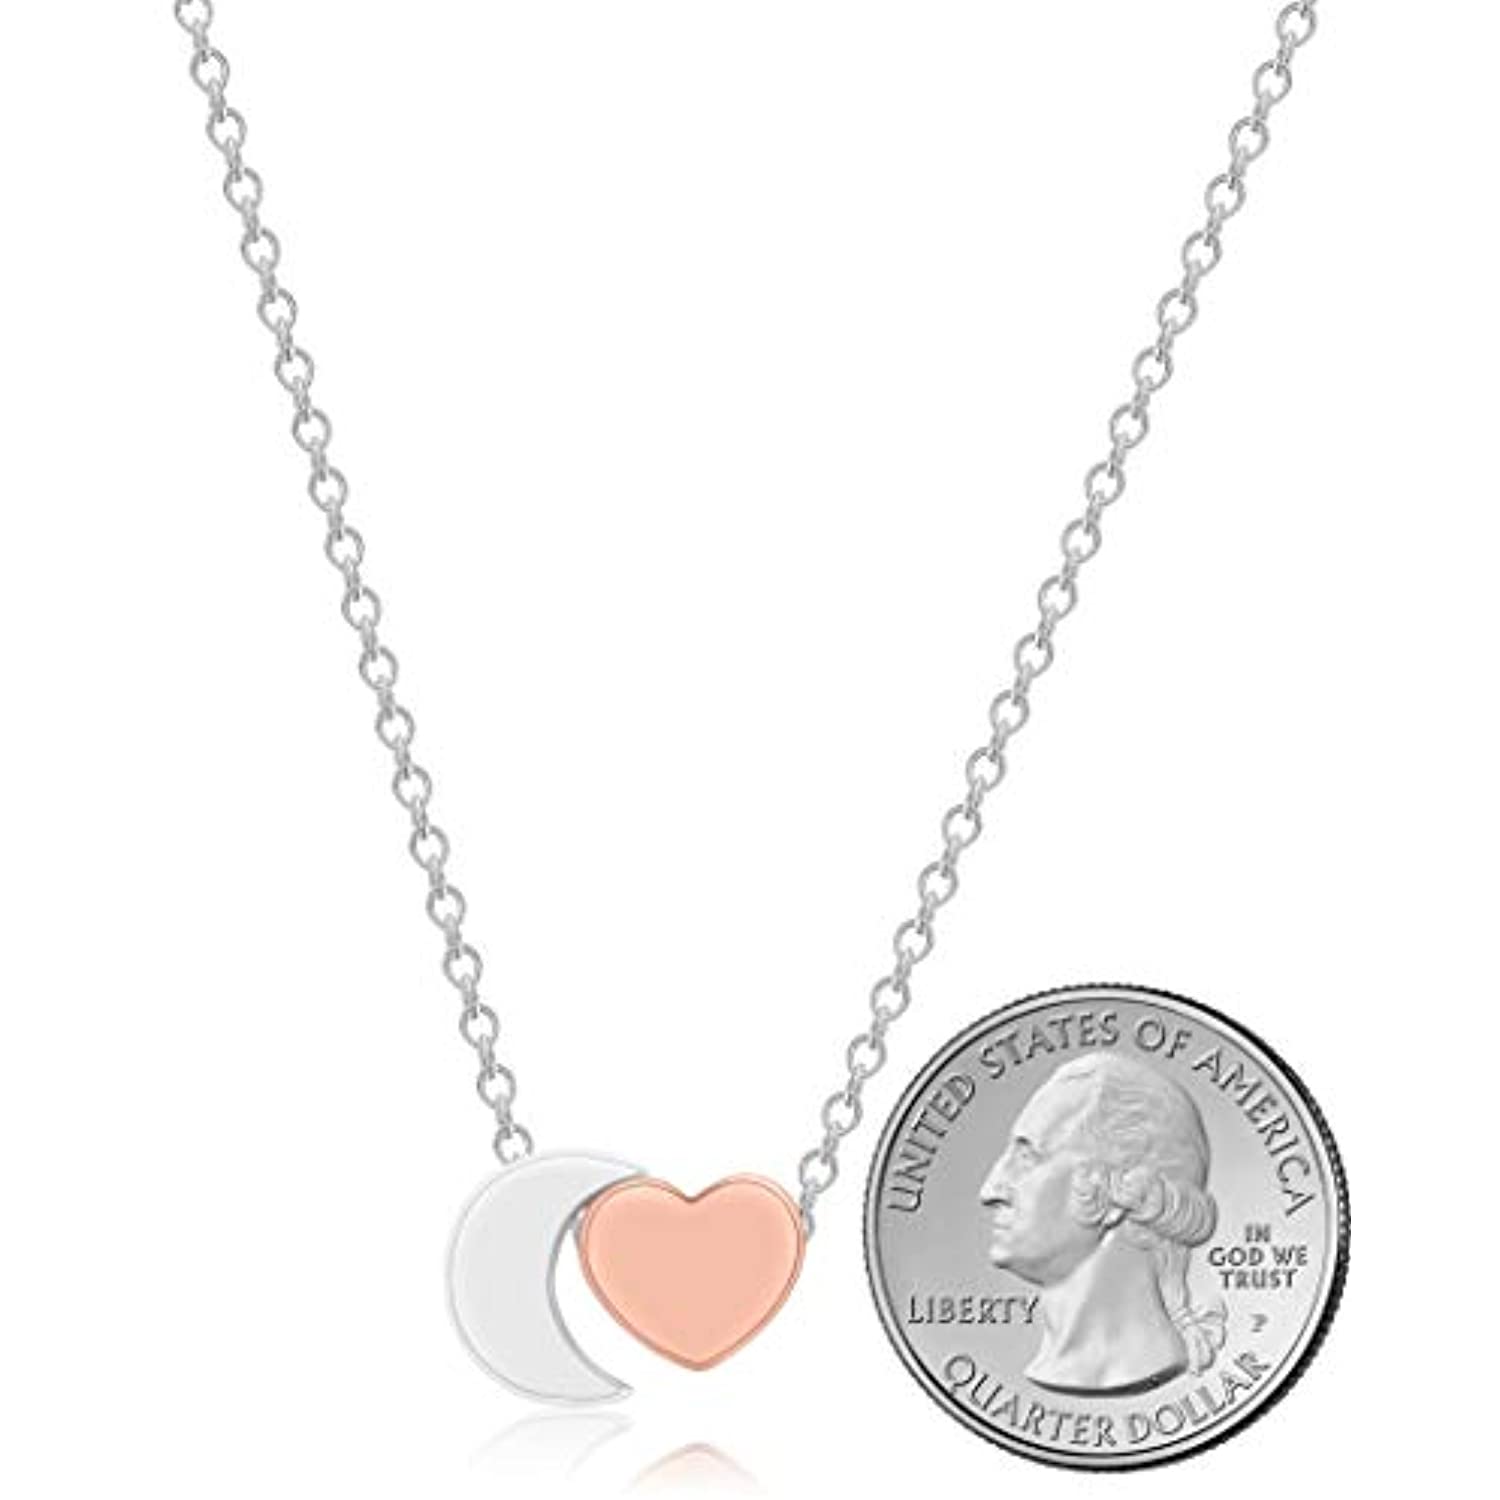 Daughter Jewelry Necklace Gift from Mom, Dad I Love You To The Moon and Back Heart & Moon Pendant Necklace, Jewelry Presents from Mother/Father Girls, Teens, Women, Adults (2-Tone Rose/Silver) - image 3 of 5